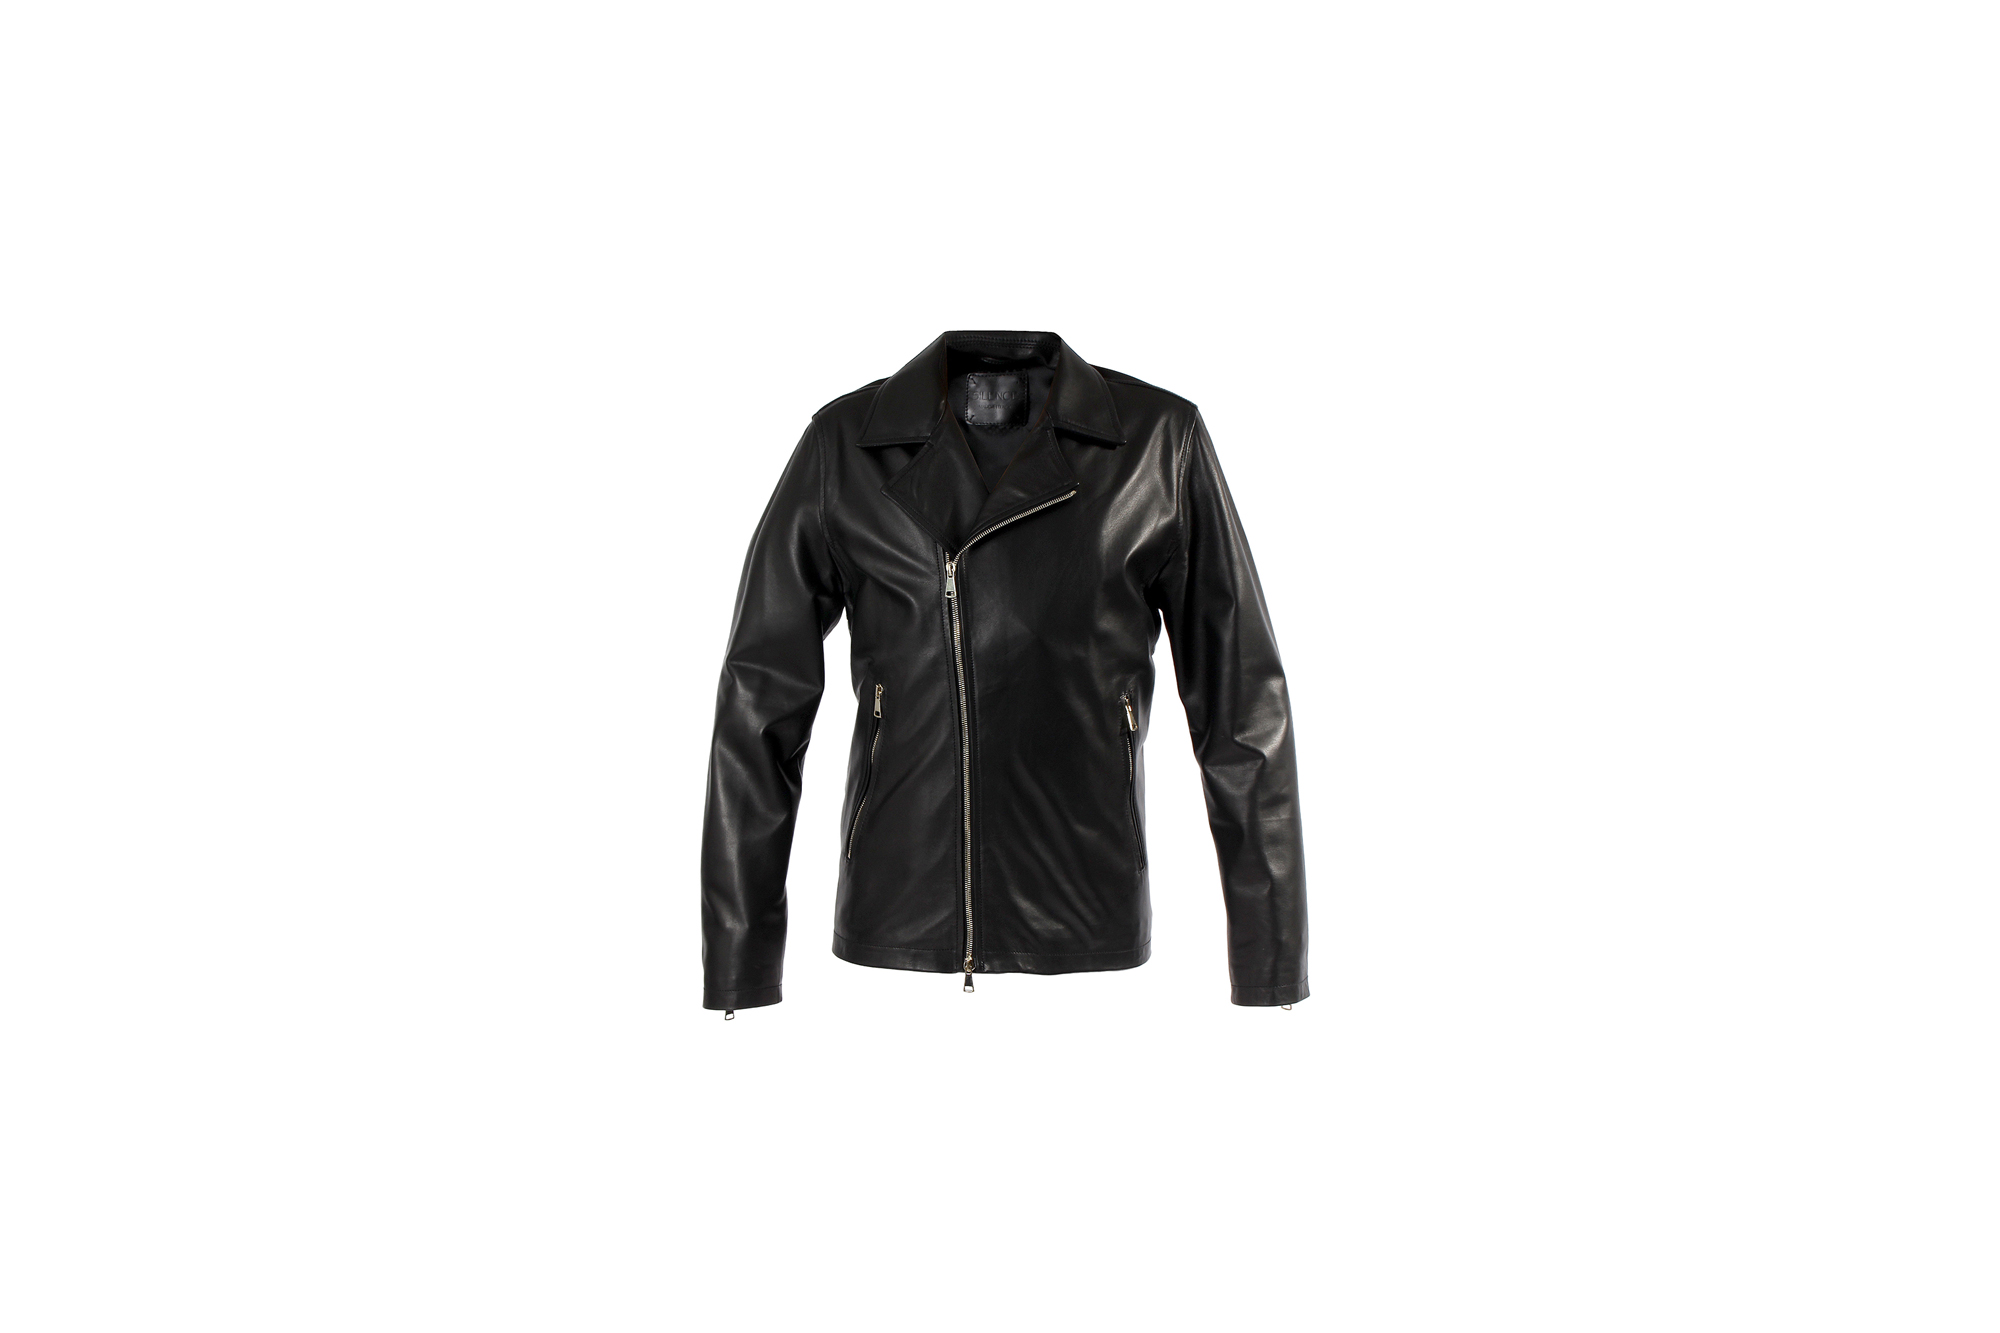 SILENCE (サイレンス) Double Riders Jacket (ダブル ライダース ジャケット) Goatskin Leather (ゴートスキンレザー) GOLD ZIP (ゴールドジップ) レザー ライダース ジャケット NERO GOLD ZIP (ブラックゴールドジップ) Made in italy (イタリア製) 2021 春夏新作 愛知 名古屋 Alto e Diritto altoediritto アルトエデリット